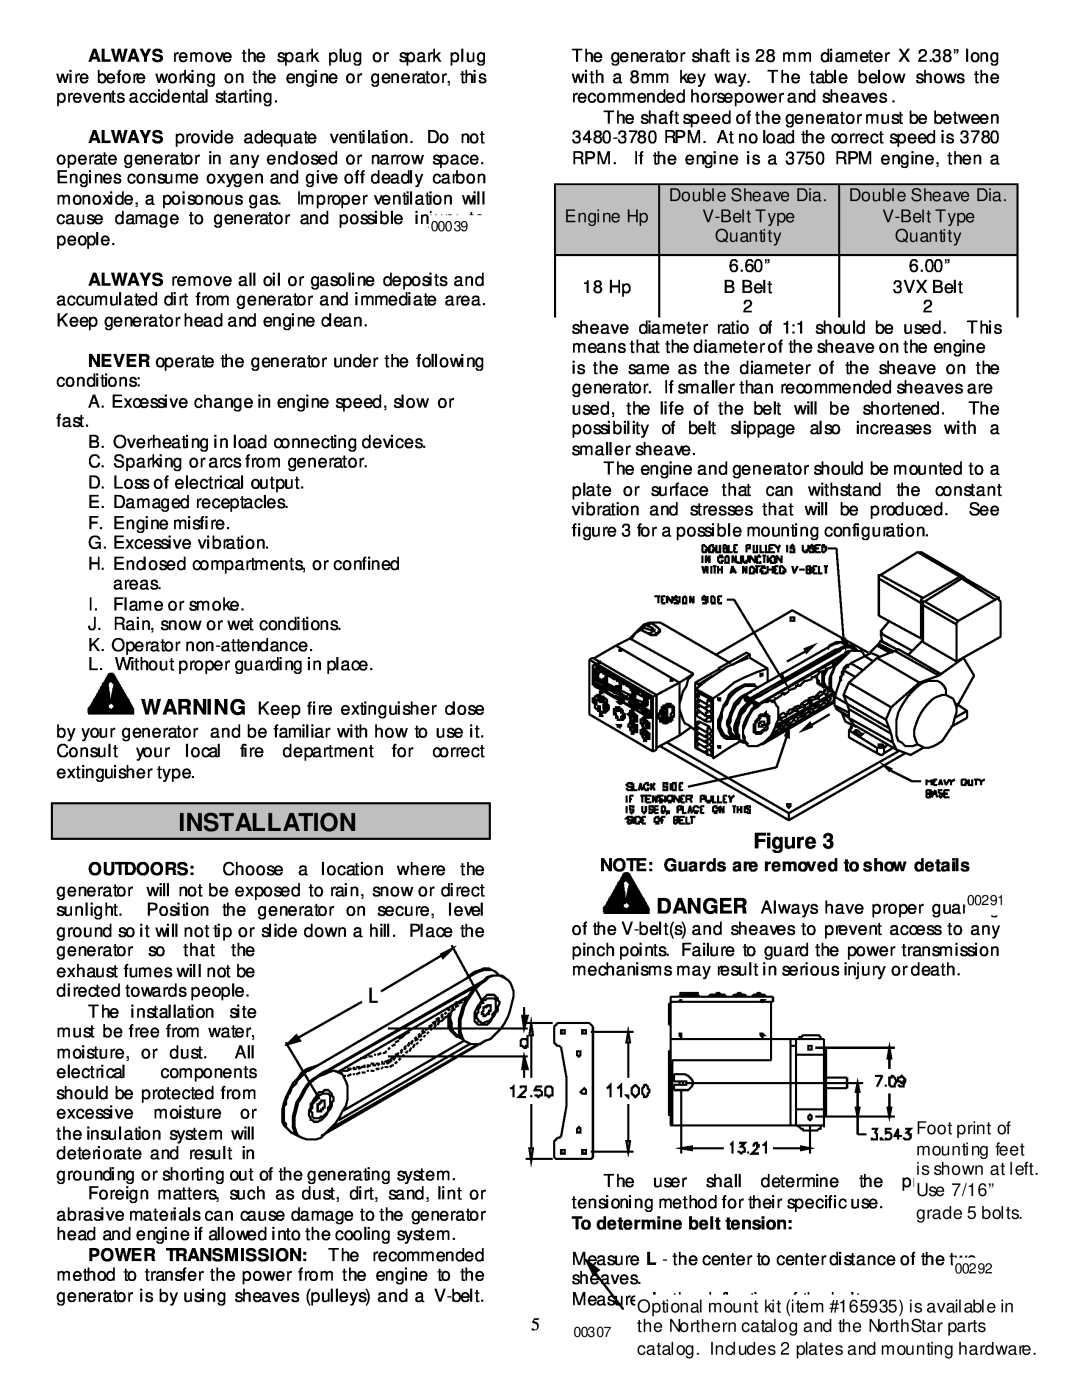 Northern Industrial Tools 10000 BDG owner manual Installation, Danger, NOTE Guards are removed to show details 